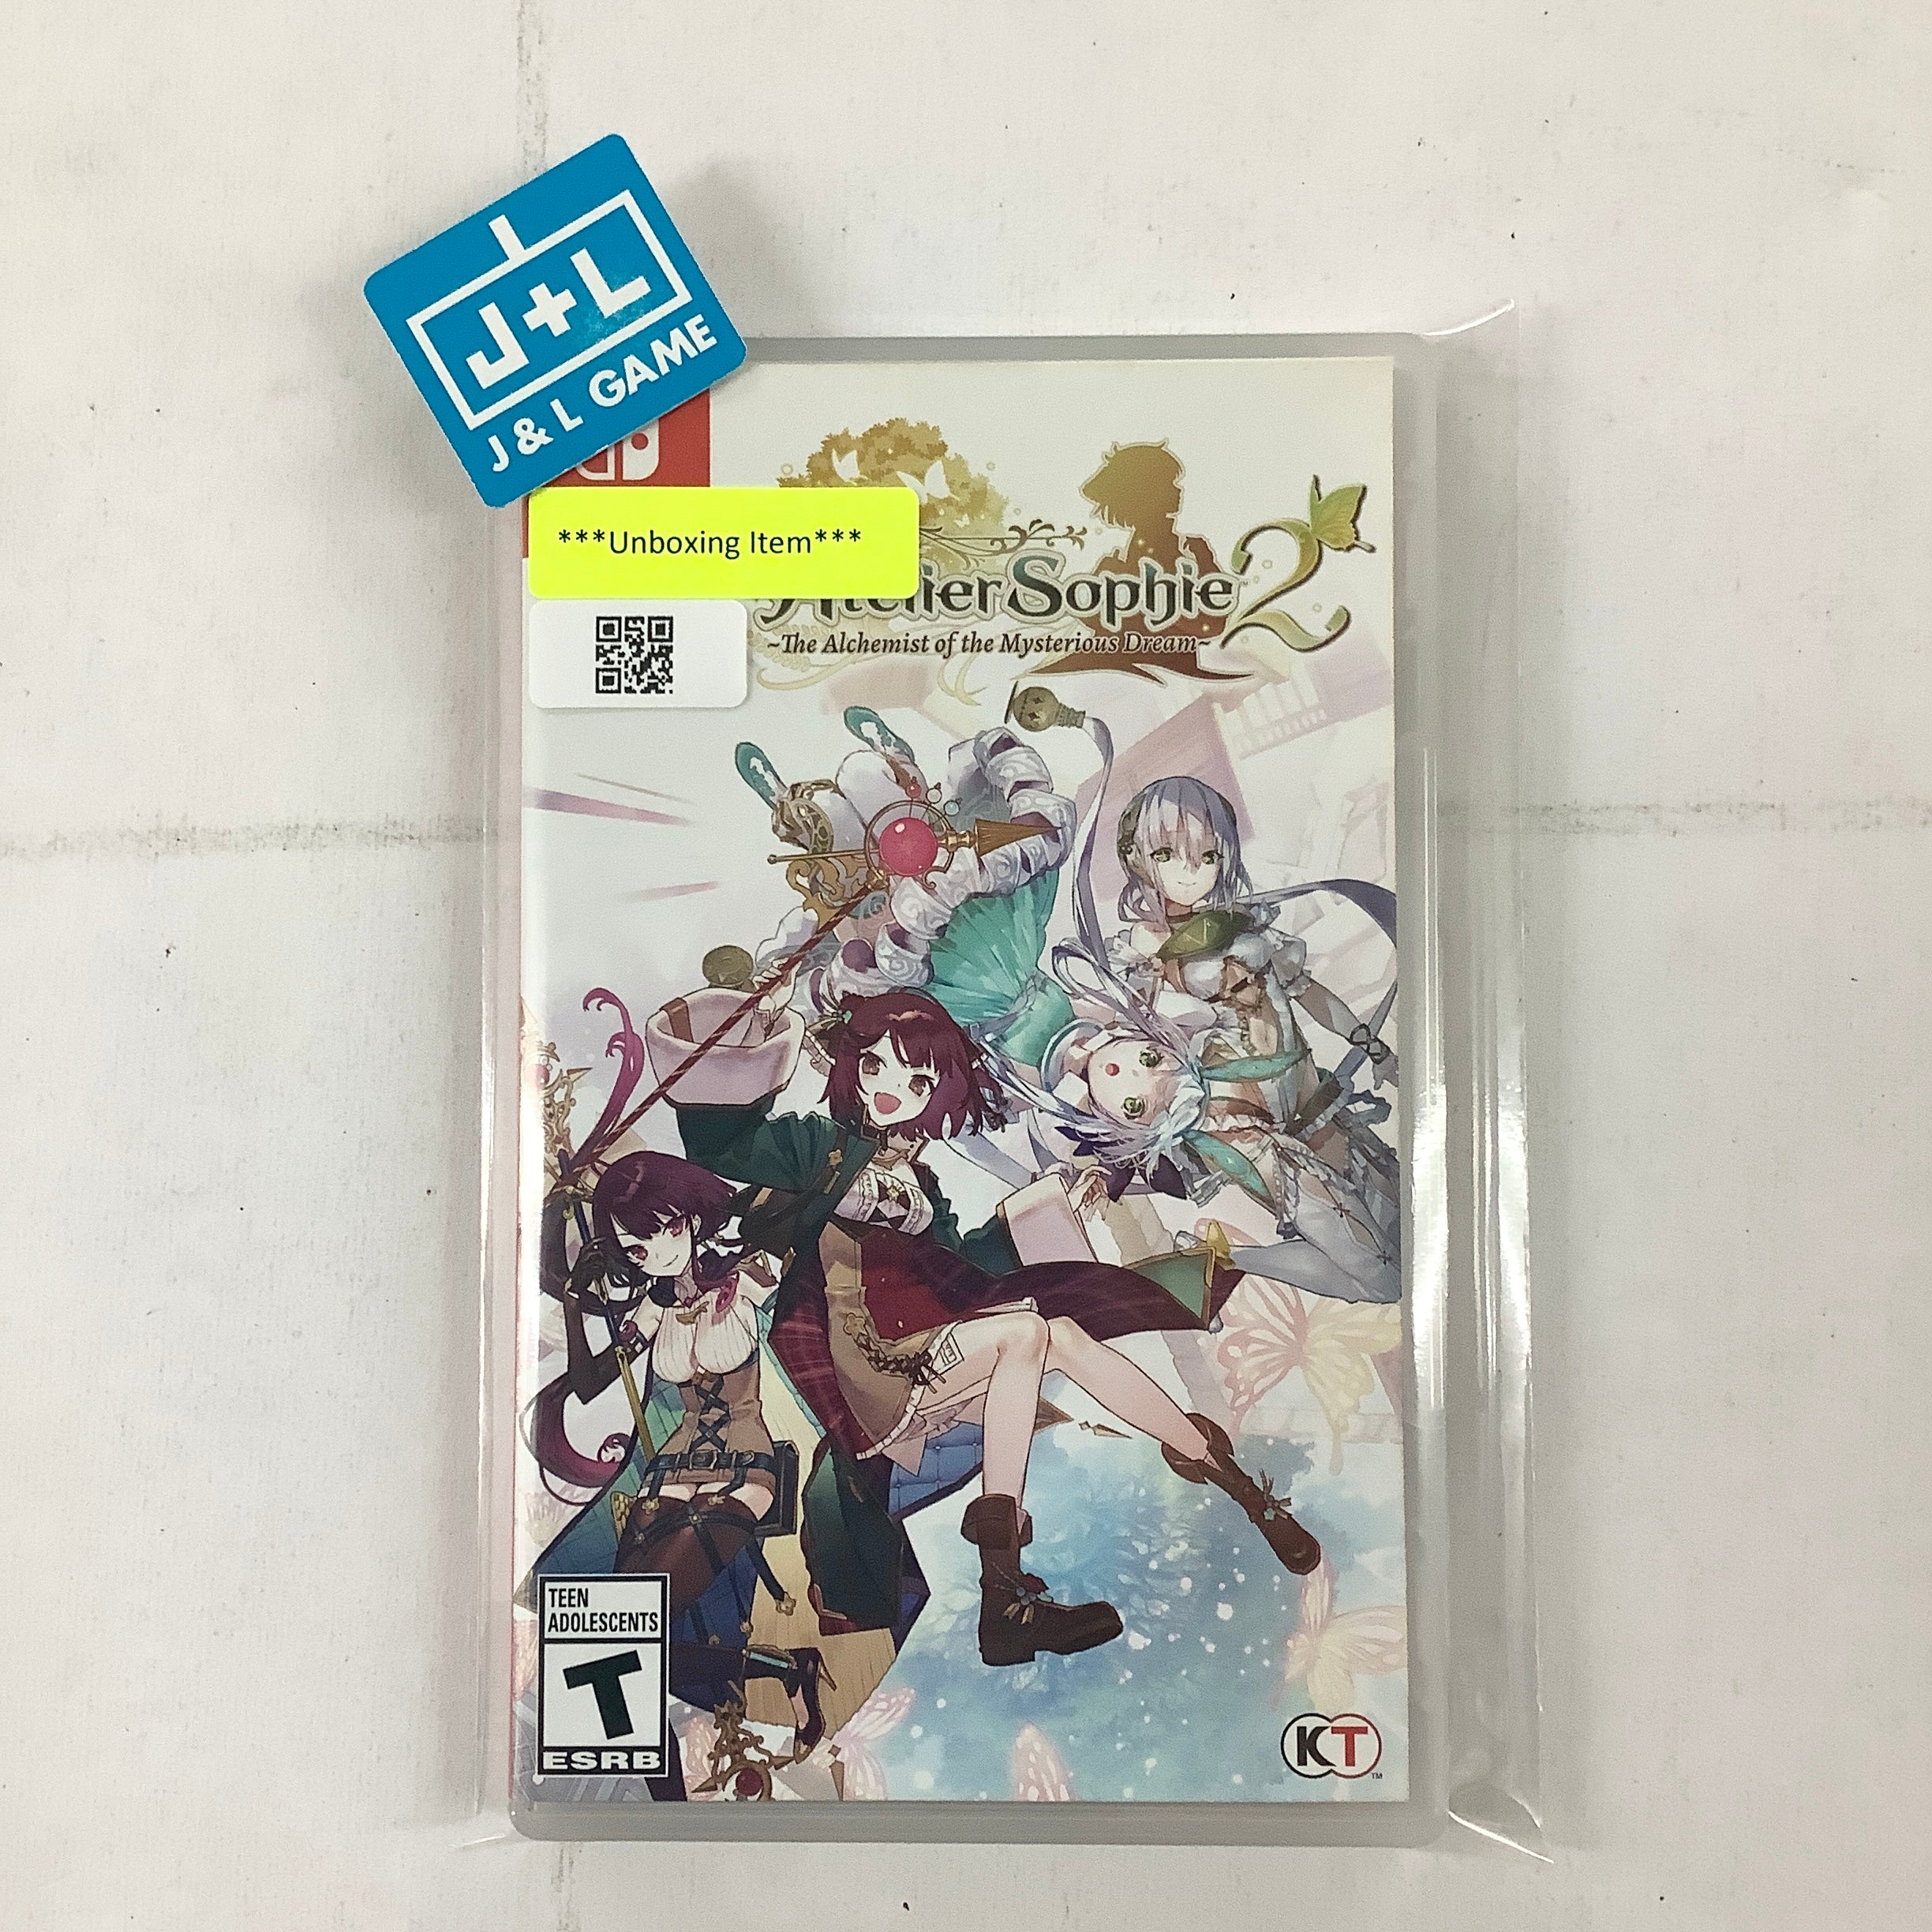 Atelier Sophie 2: The Alchemist of the Mysterious Dream - (NSW) Nintendo Switch [UNBOXING] Video Games KT   